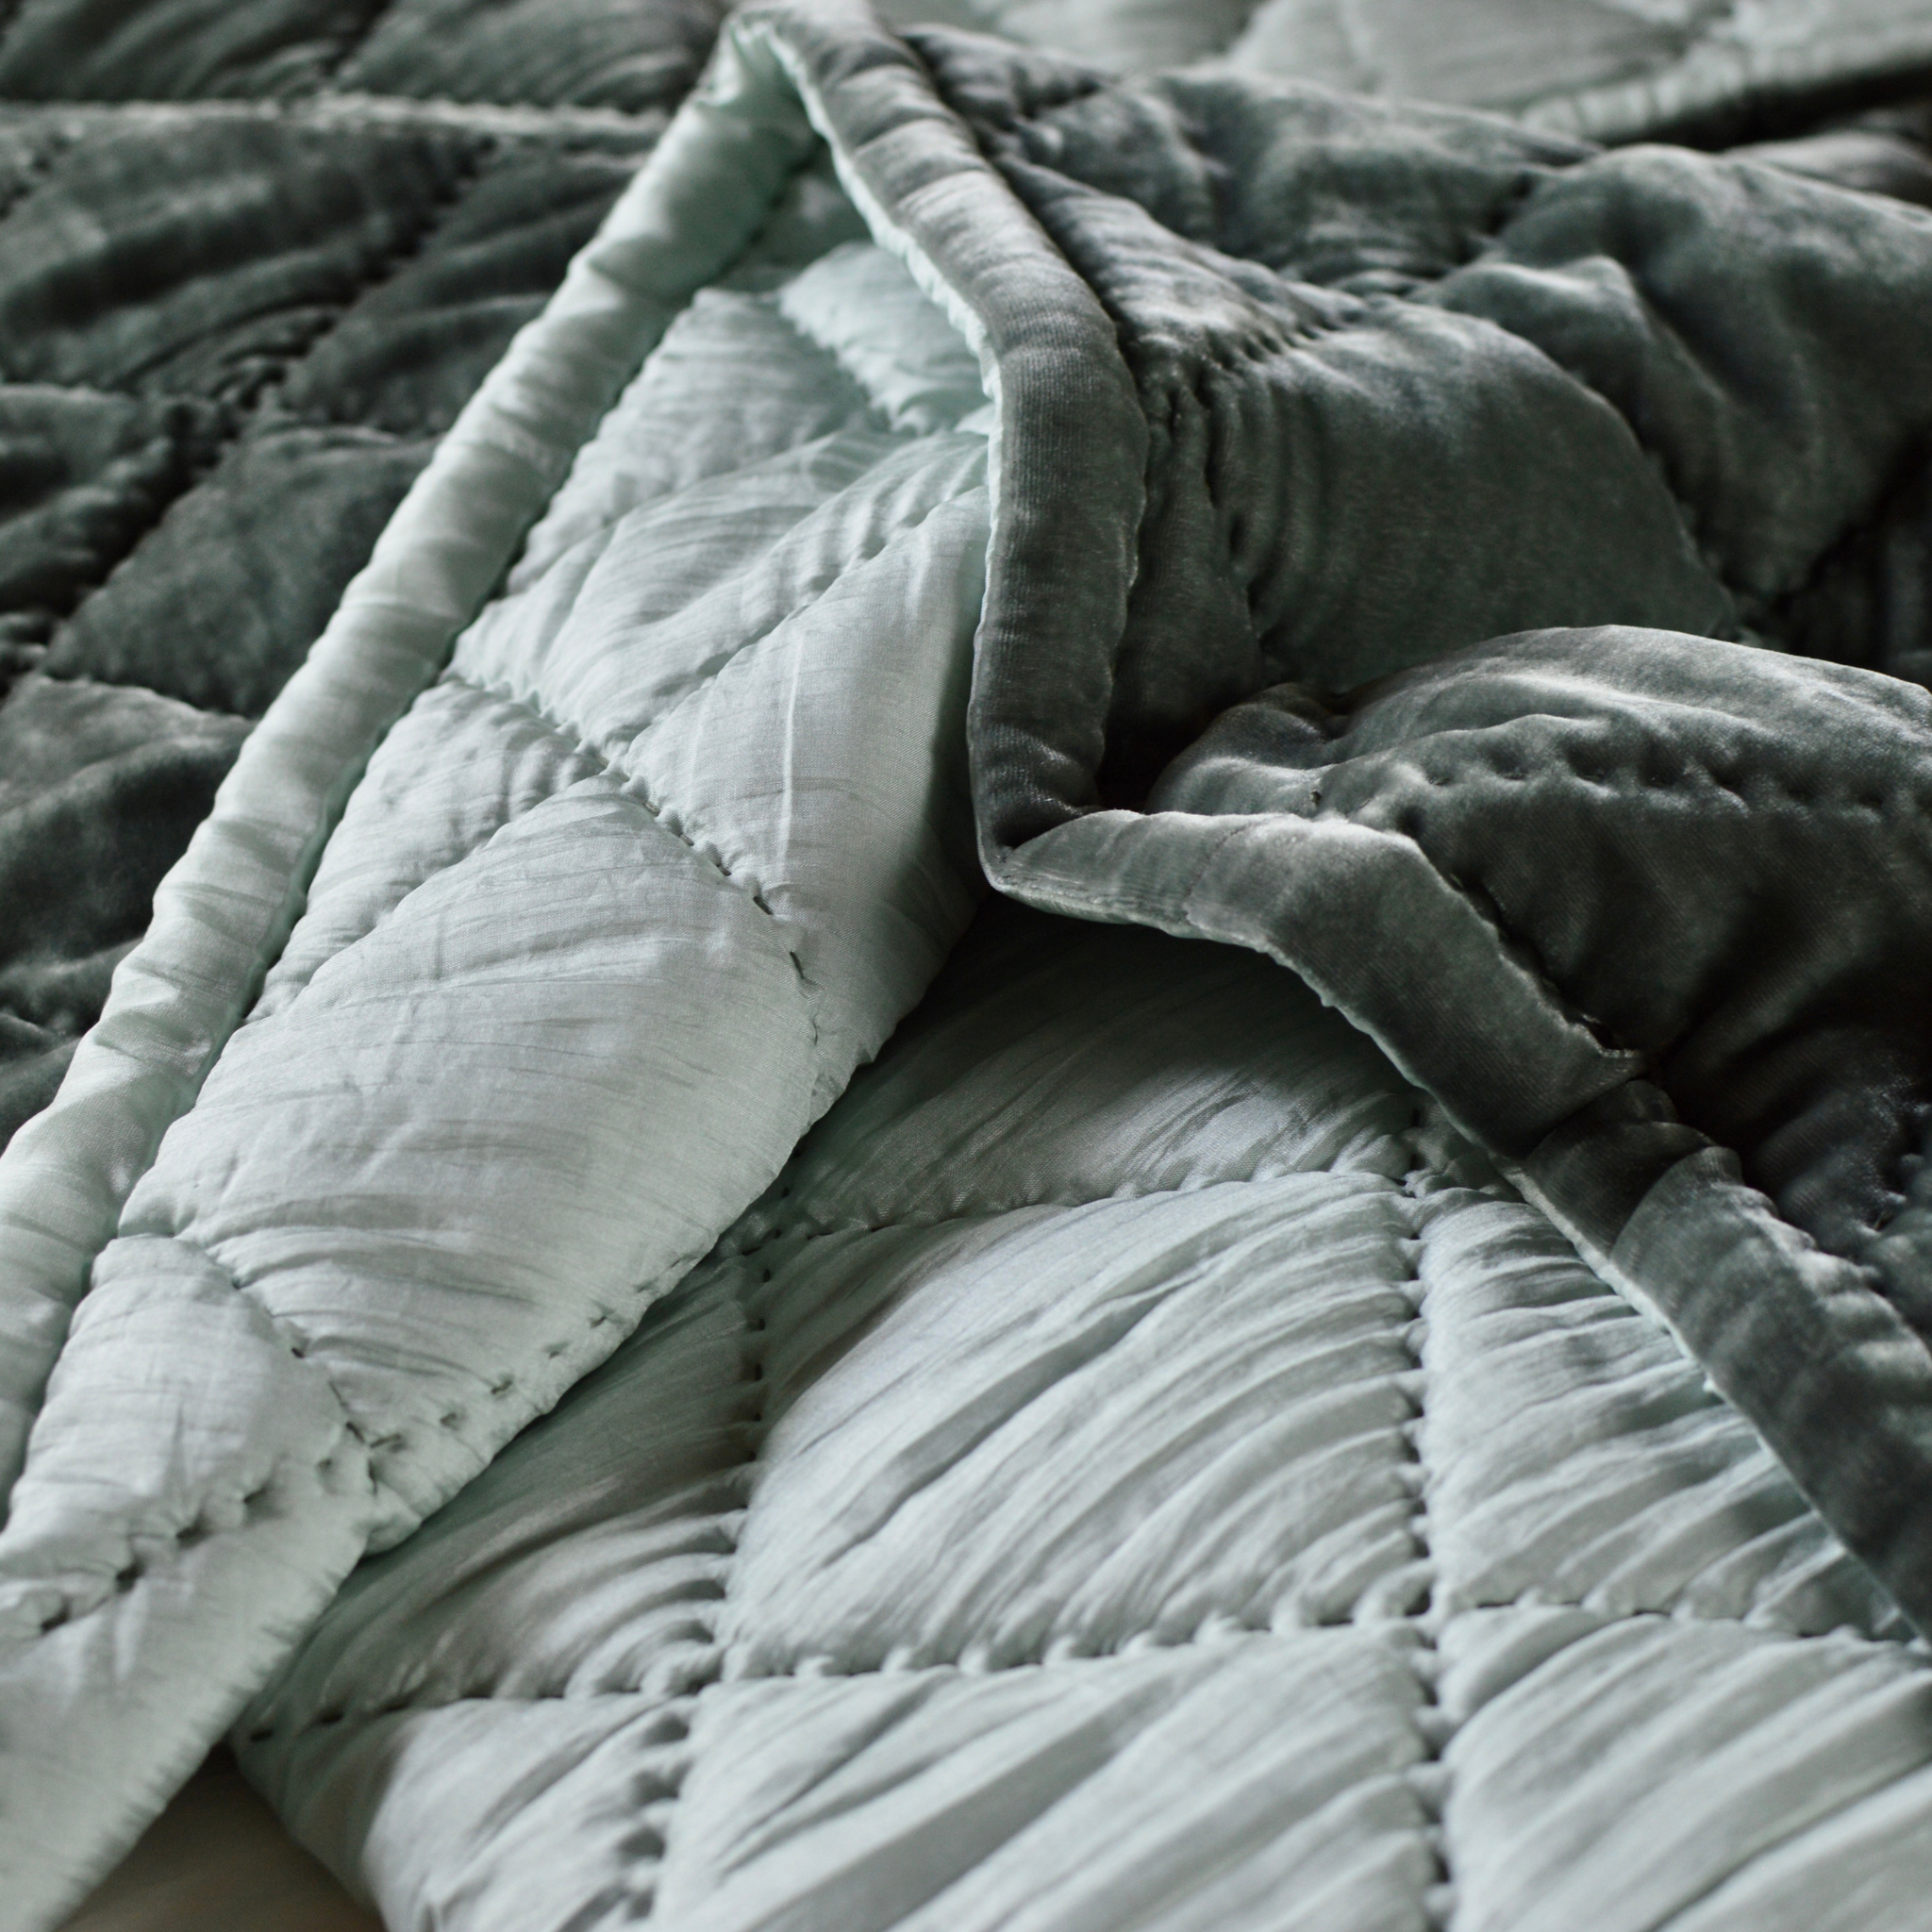 Silk Velvet Hand Quilted Duvet Covers -Diamond Hand Stitching- Seaweed & Mint